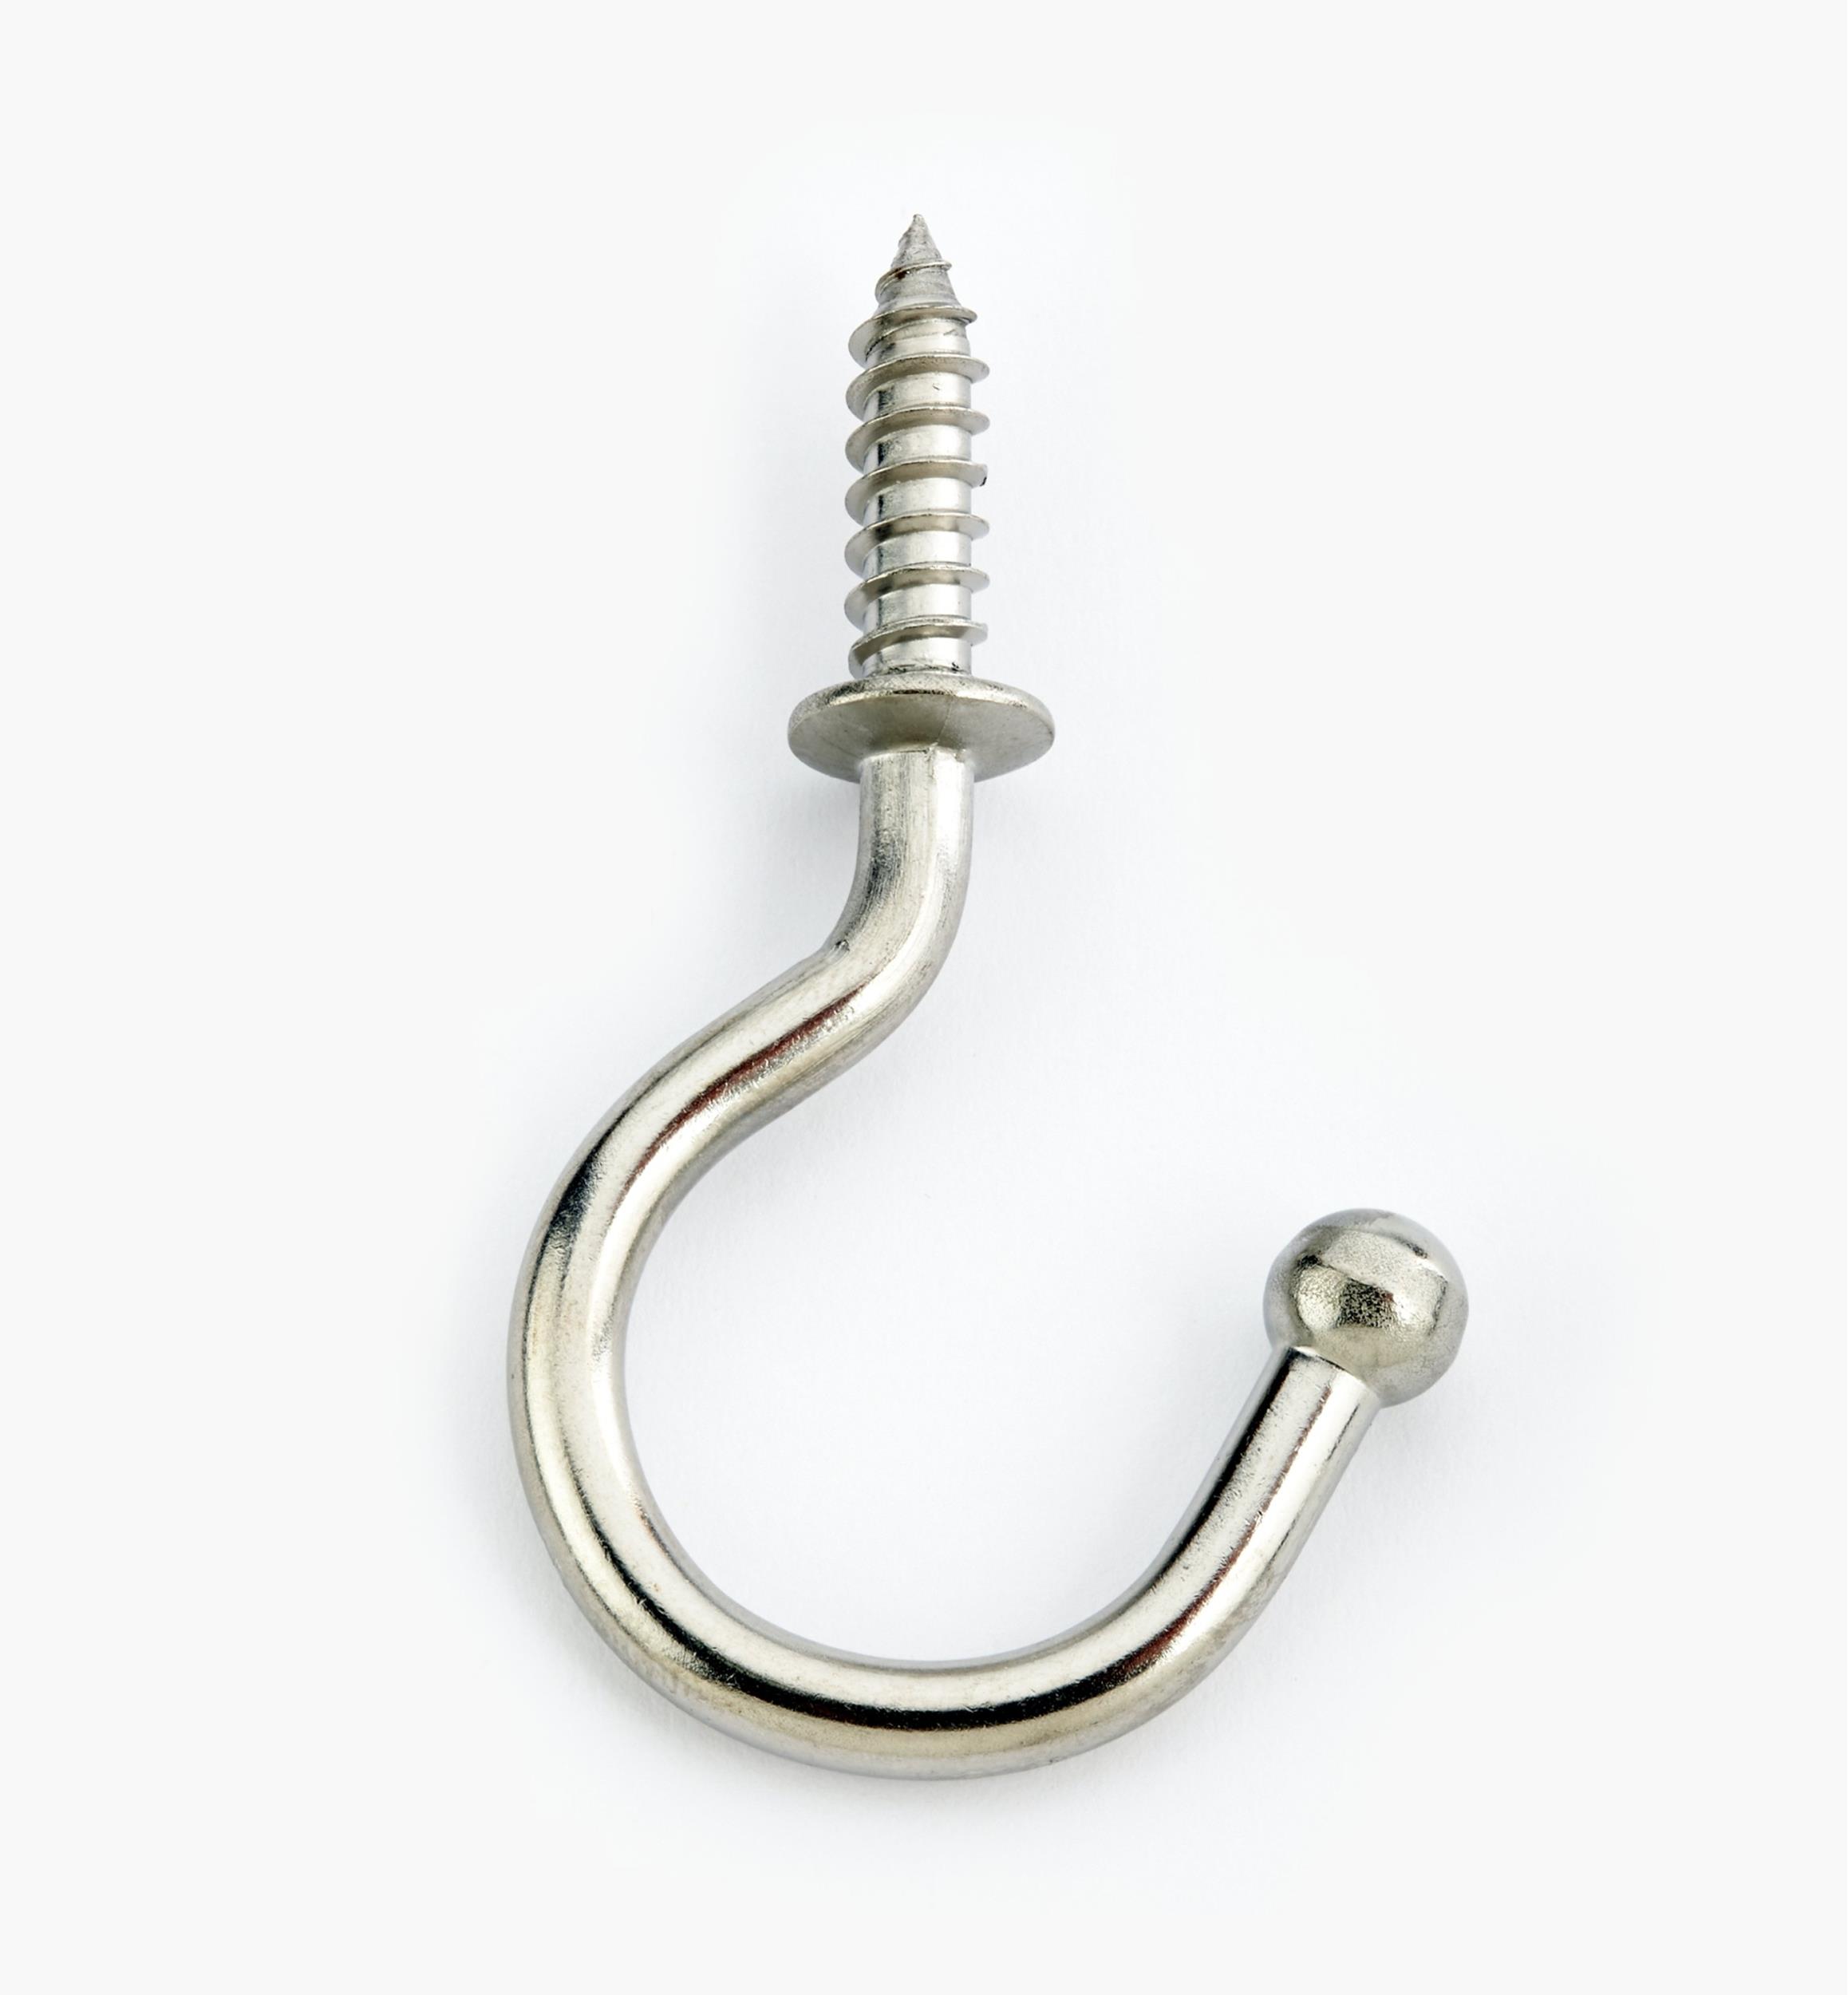 S Hooks For Hanging Factory Store, Save 62% | jlcatj.gob.mx